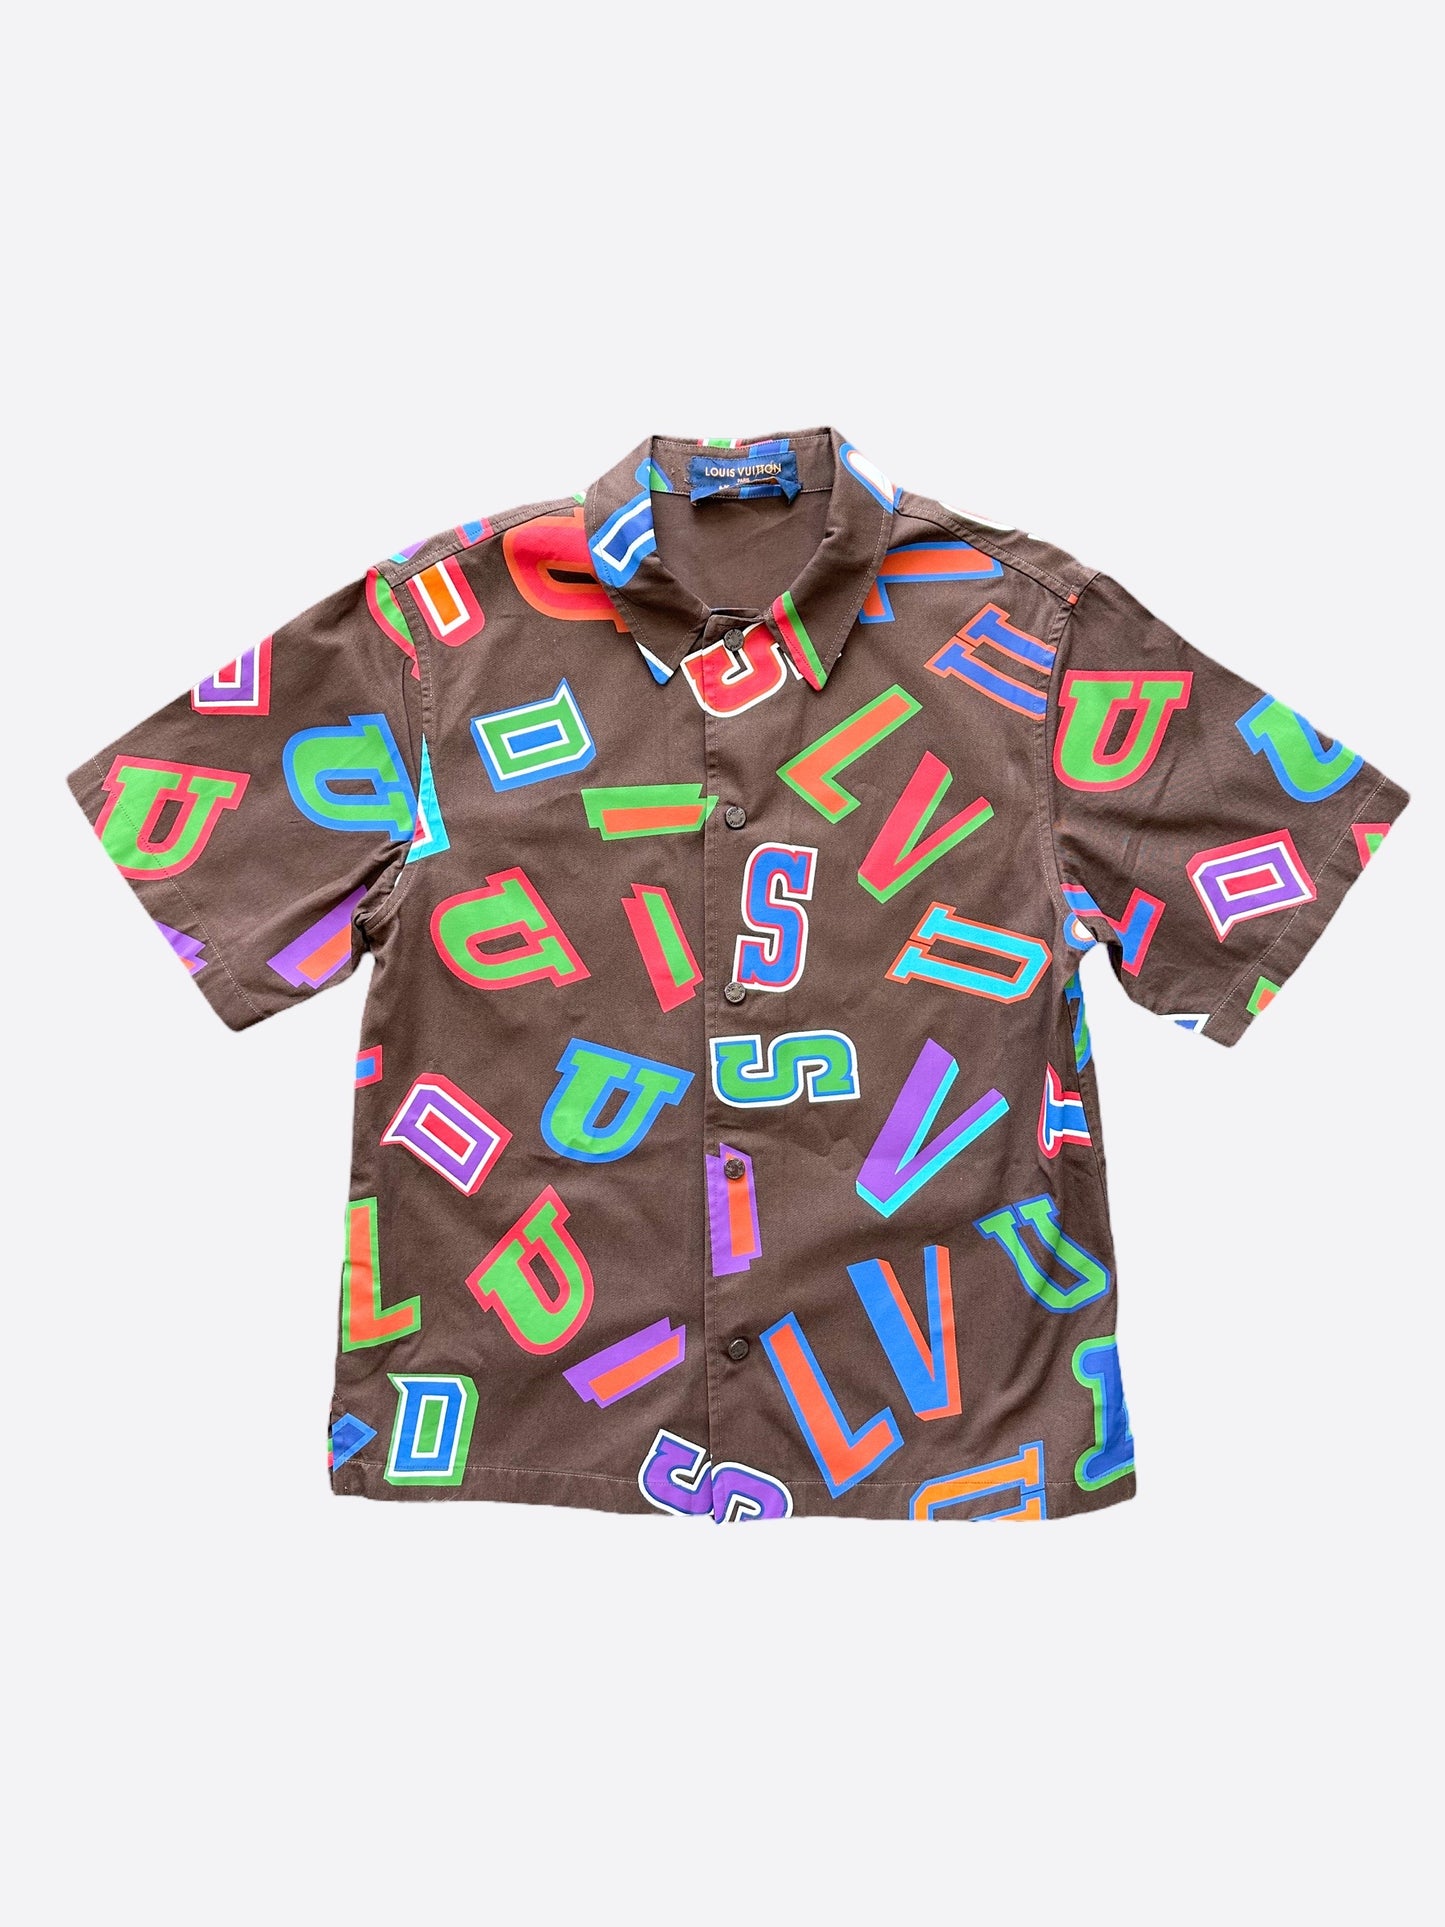 Louis Vuitton x NBA Basketball Letters Button Up Shirt Brown Pre-Owned